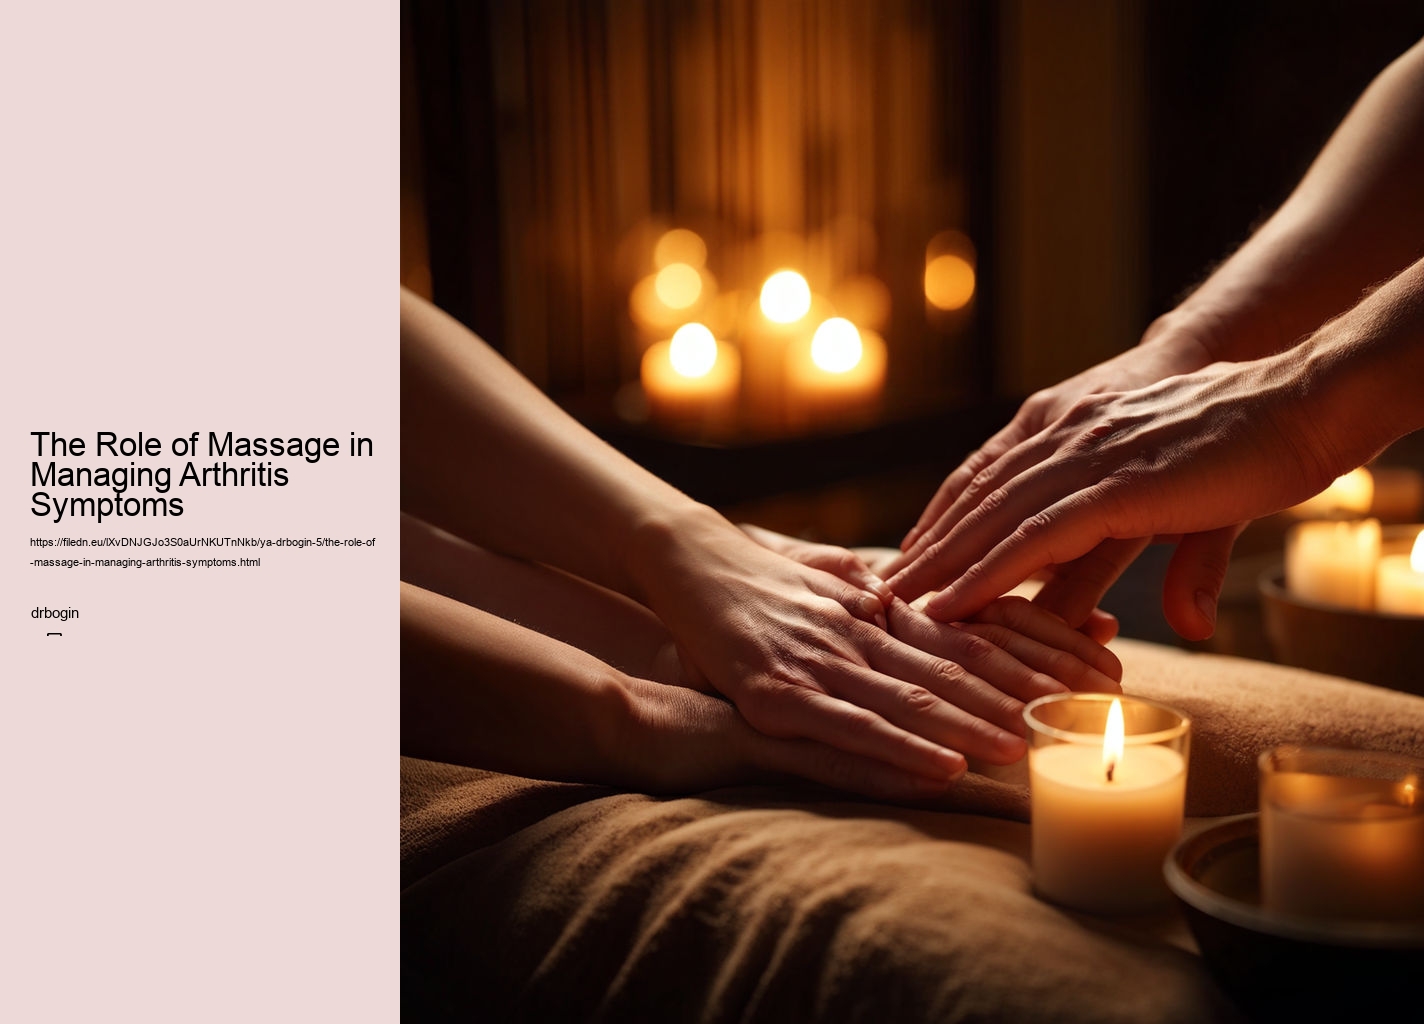 The Role of Massage in Managing Arthritis Symptoms